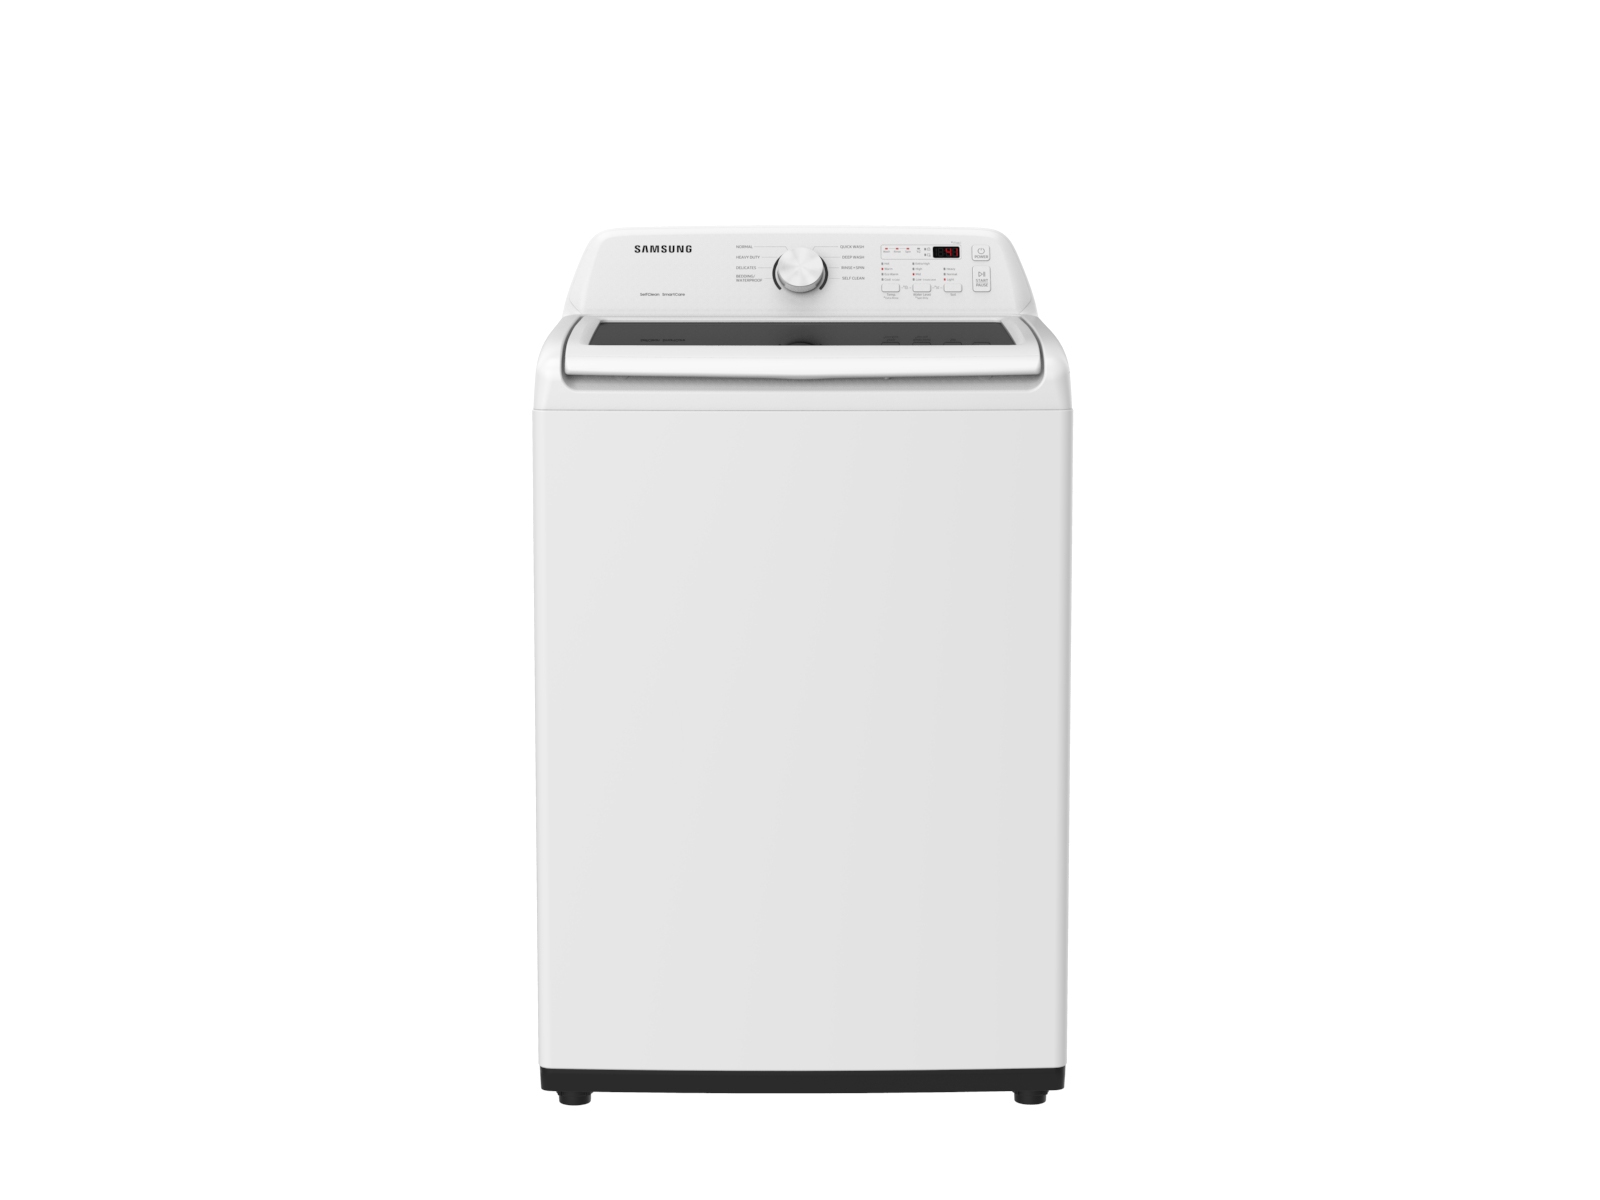 4.5 cu. ft. Capacity Top Load Washer with Vibration Reduction Technology+  in White Washers - WA45T3200AW/A4